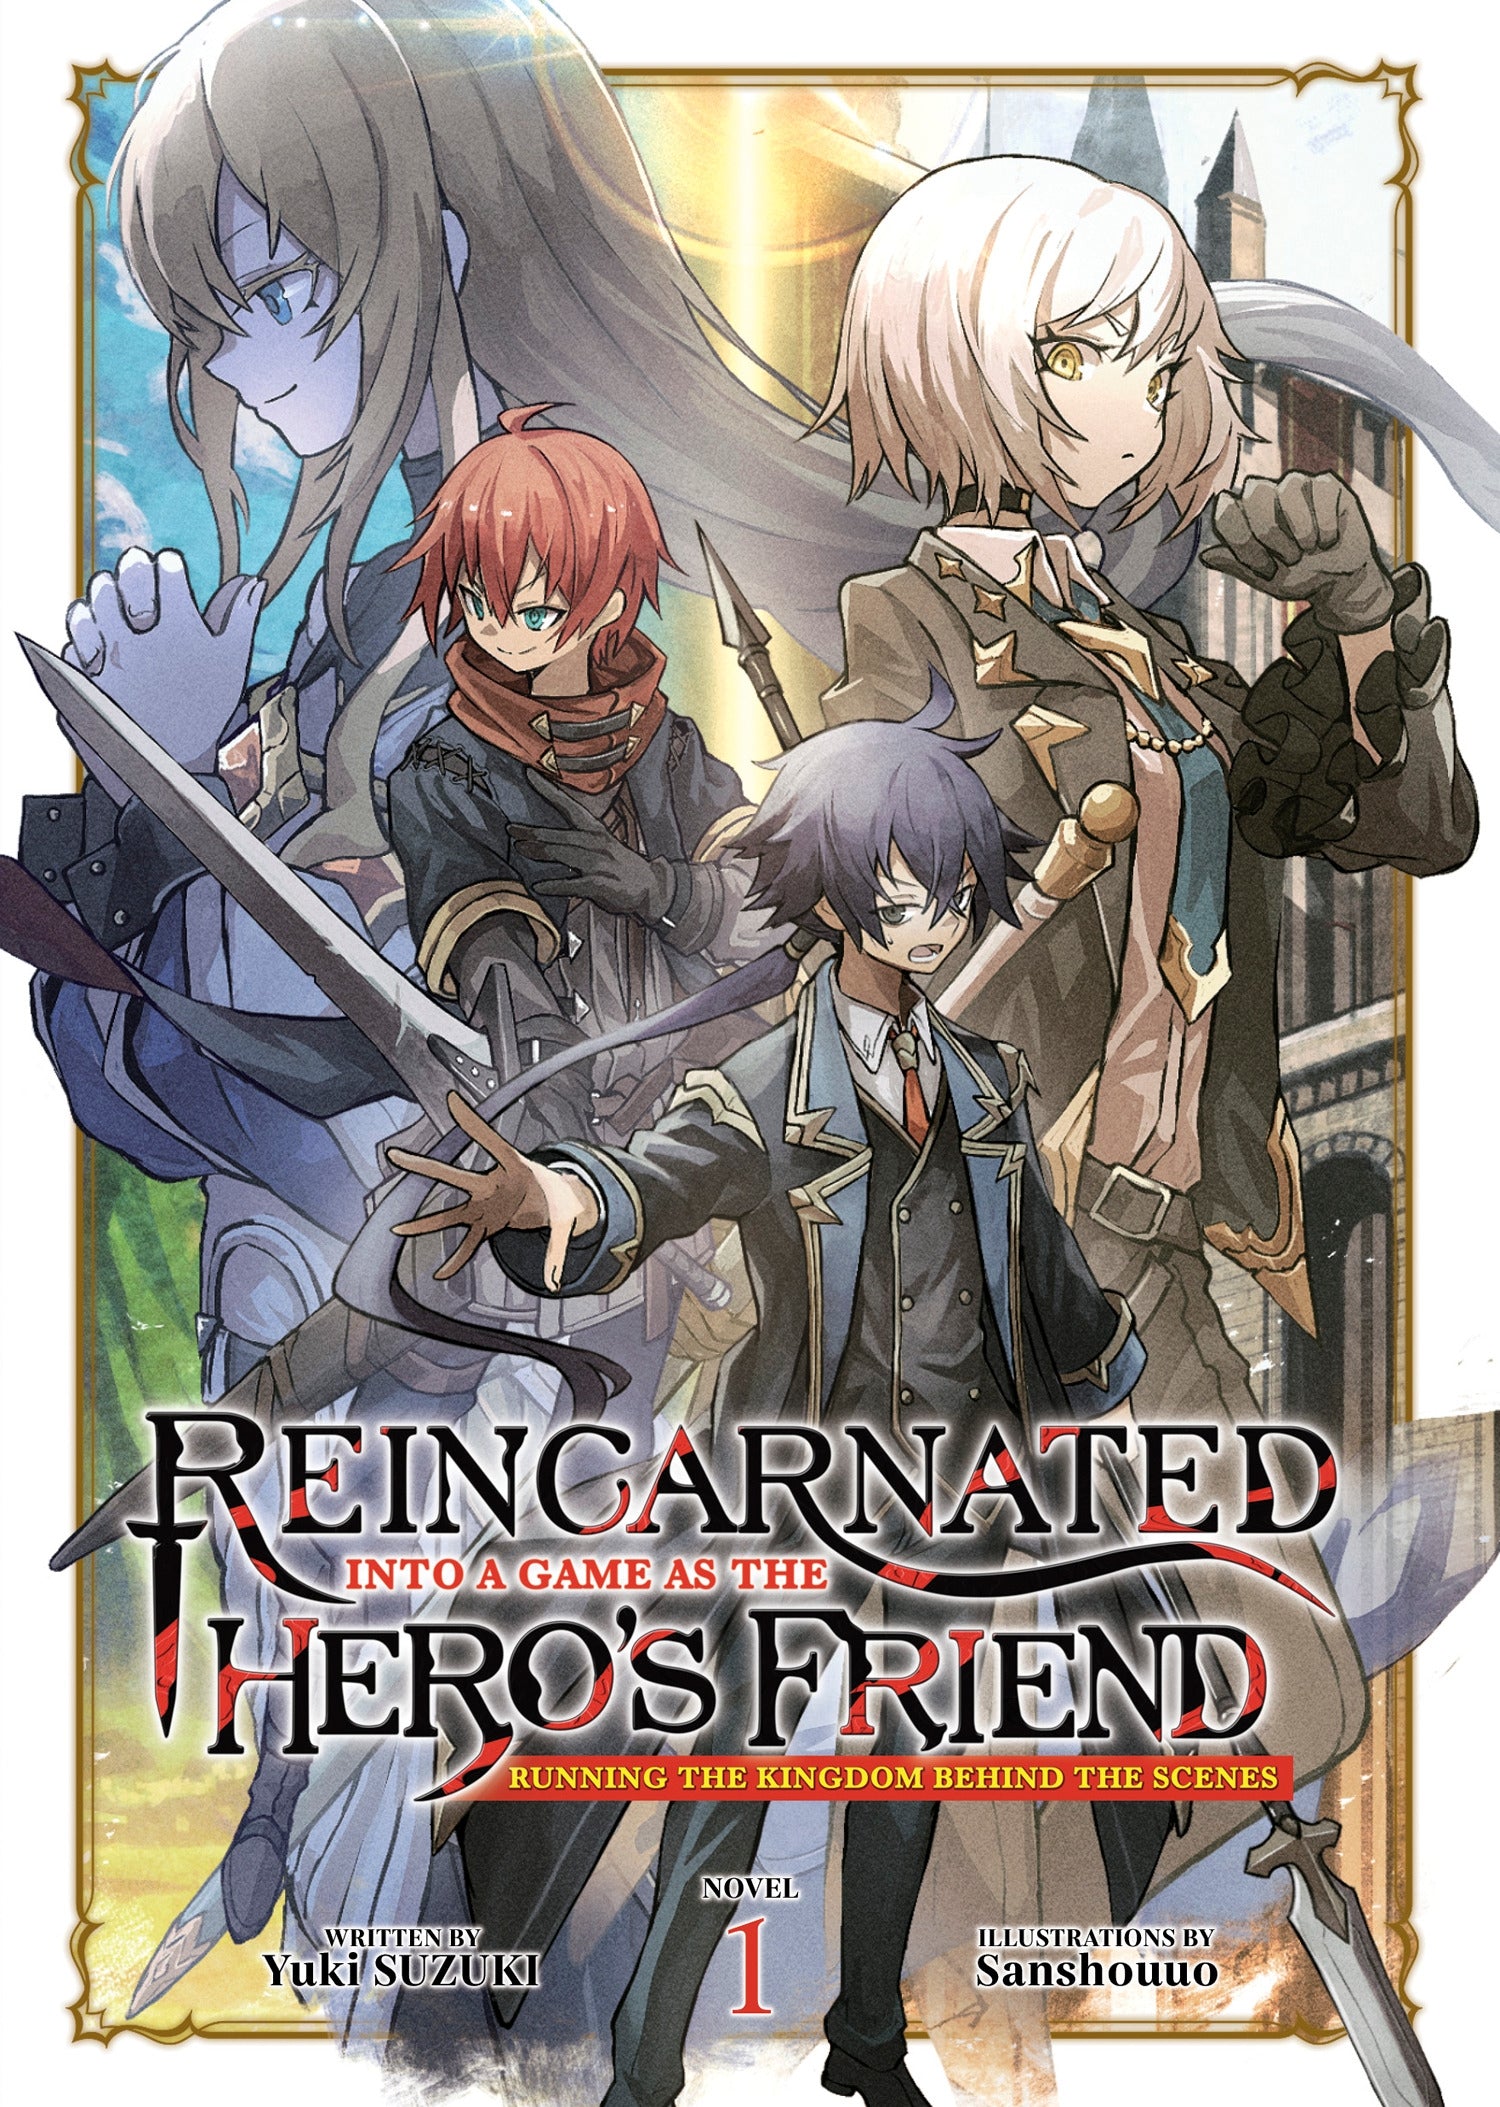 Reincarnated Into a Game as the Hero's Friend Running the Kingdom Behind the Scenes (Light Novel) Vol. 1